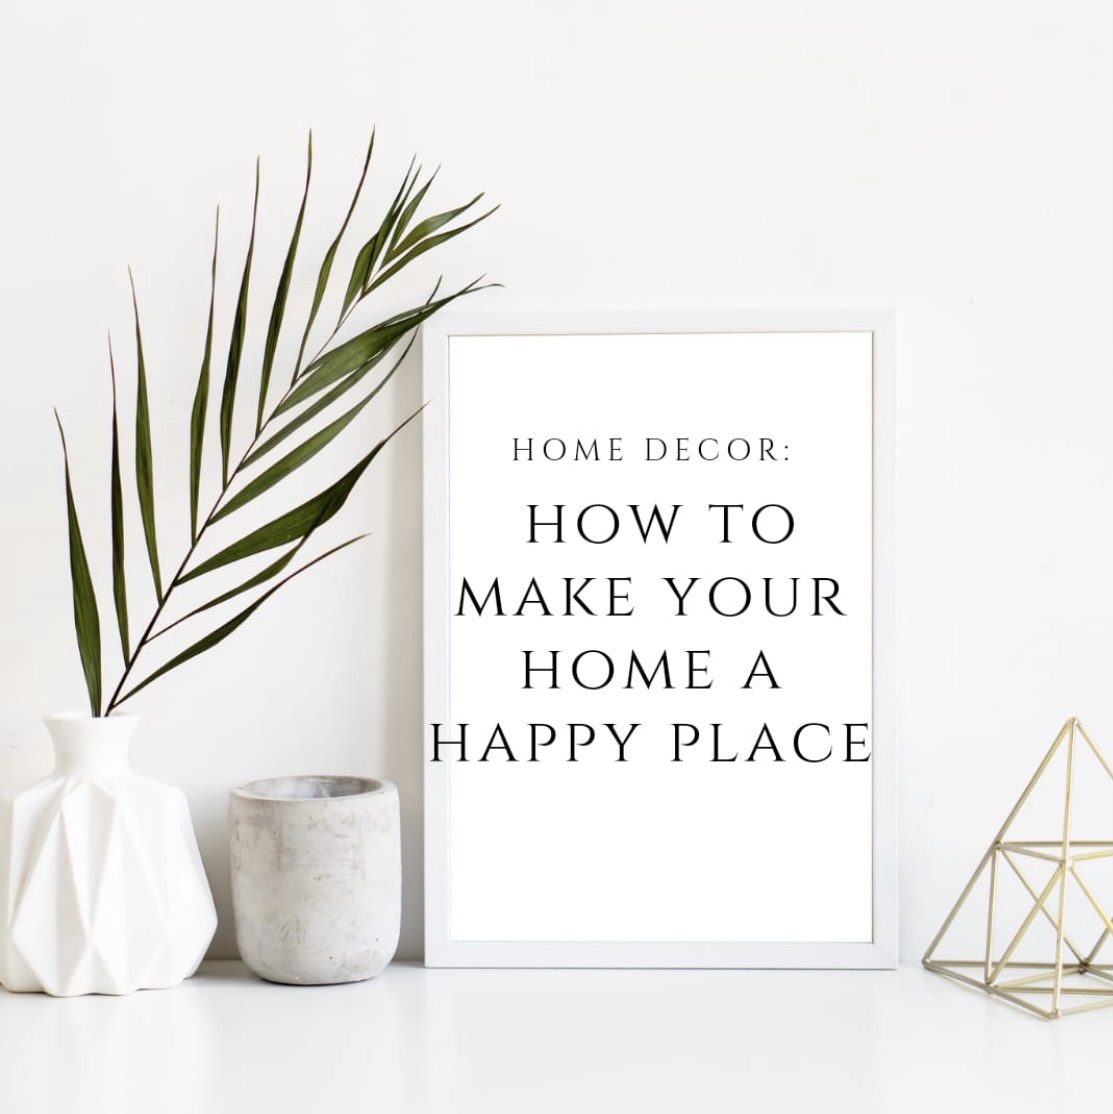 Home decor: how to make your home a happy space